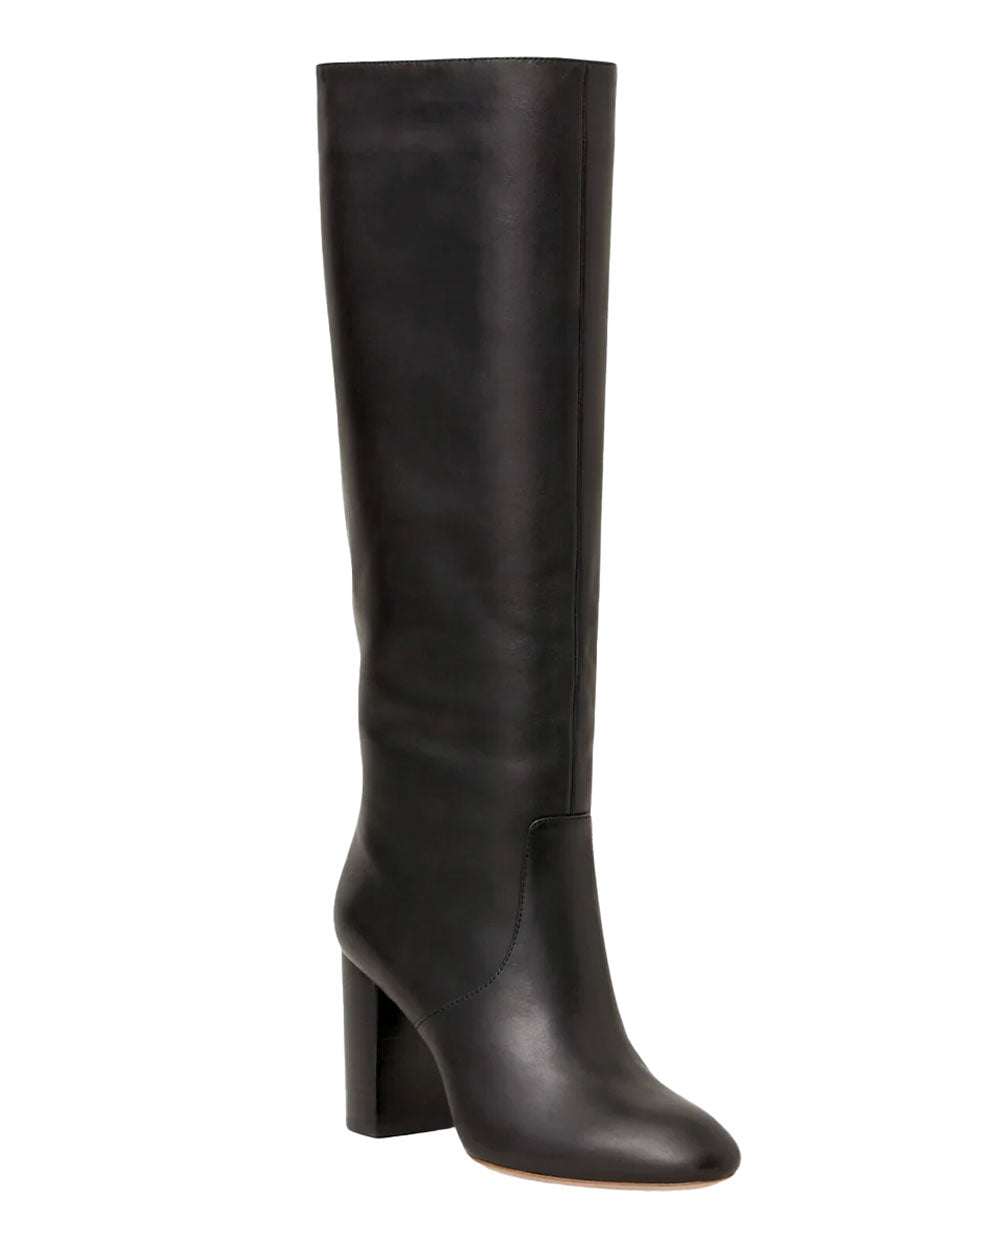 Goldy Tall Boot in Black